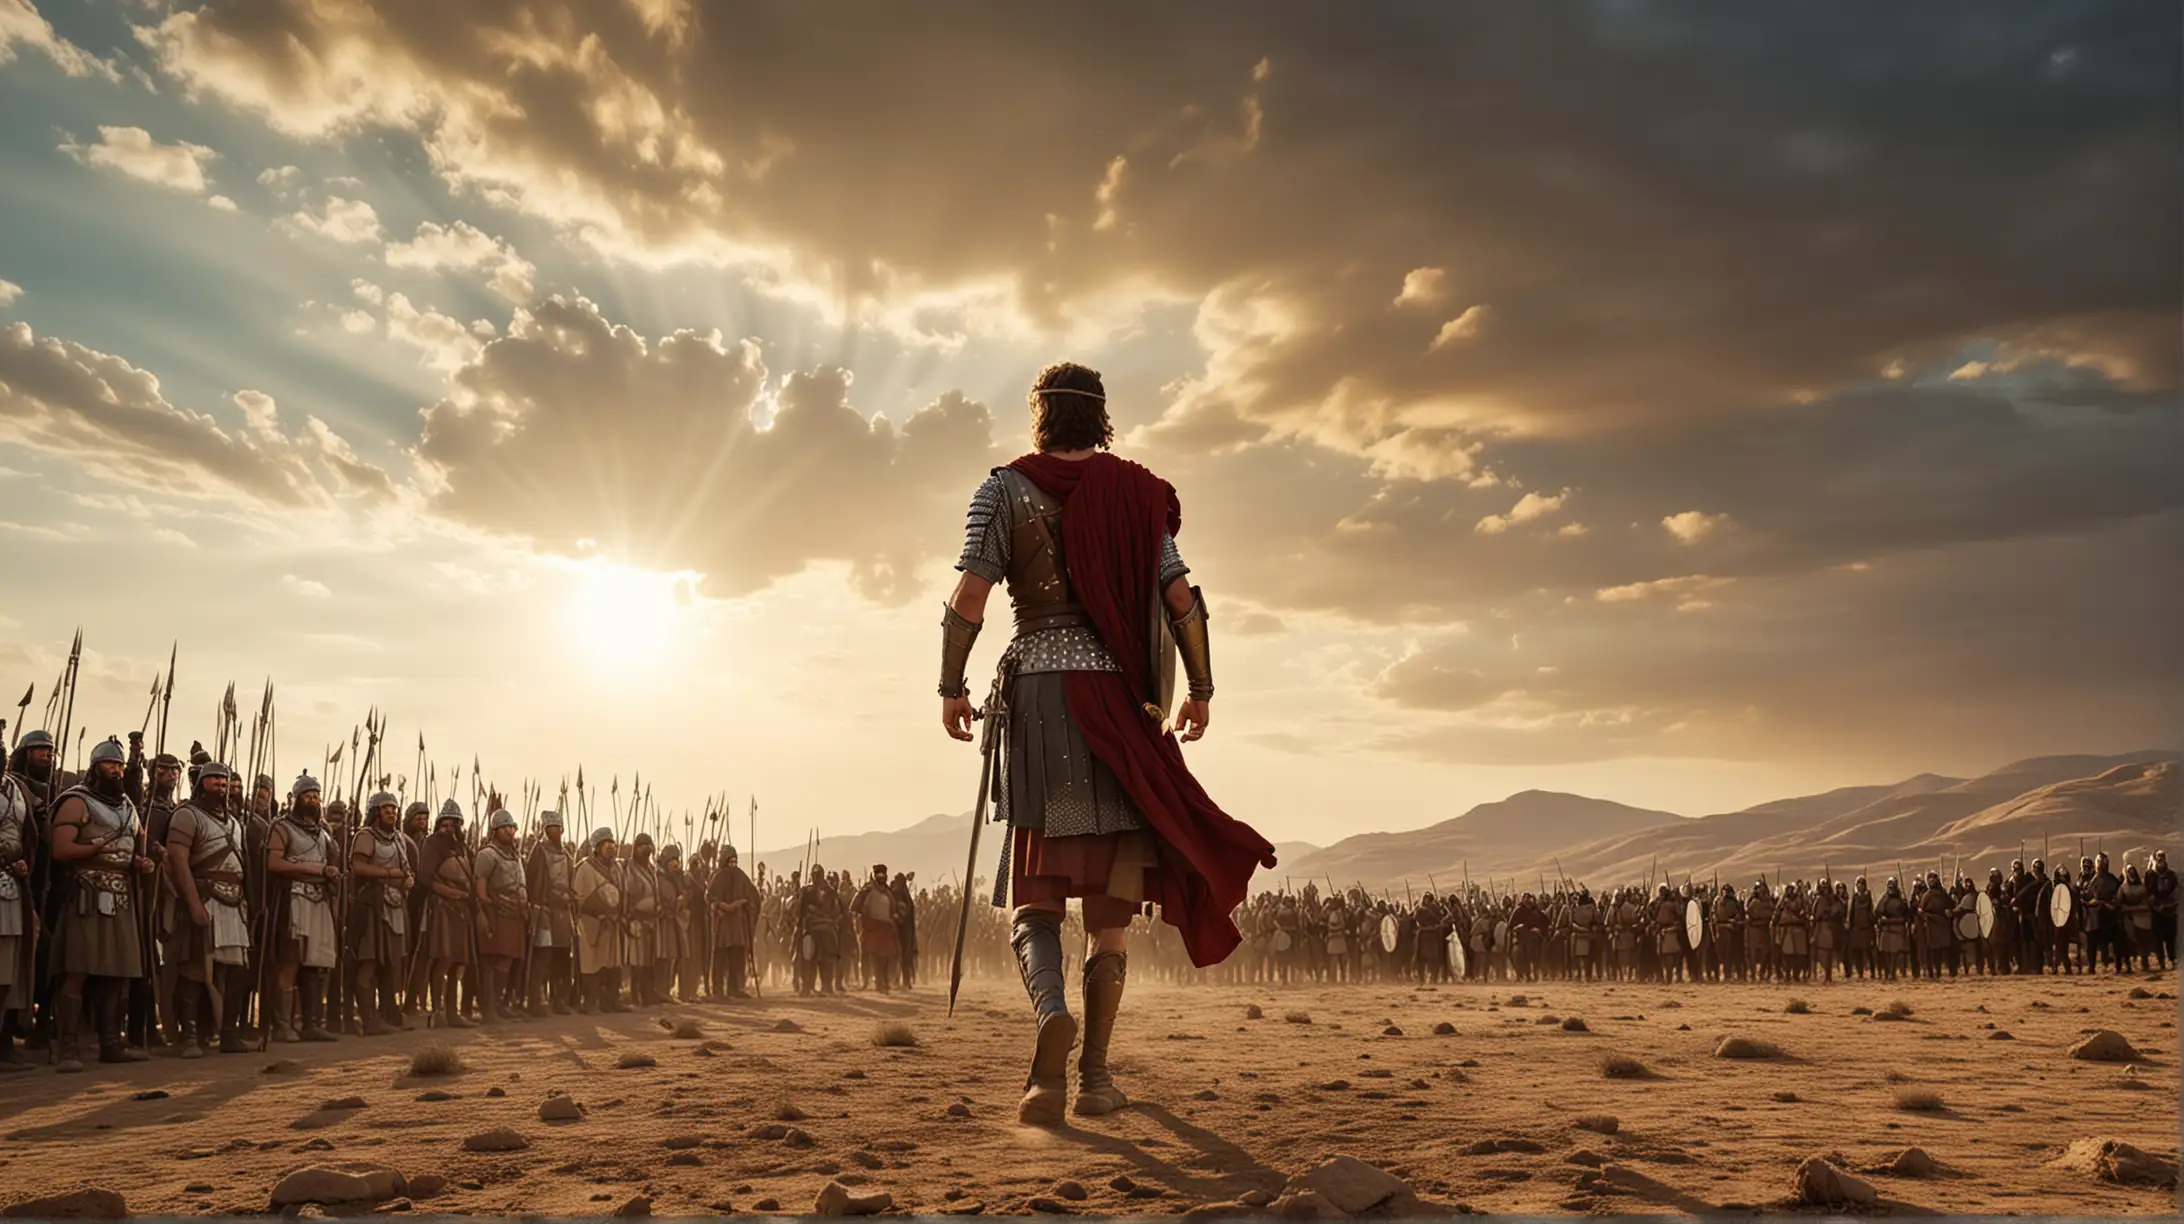 A battle ready King David facing a crowd of warriors on desert hilly fields. In the background a magnificent sky. Set during the Biblical Era of King David.